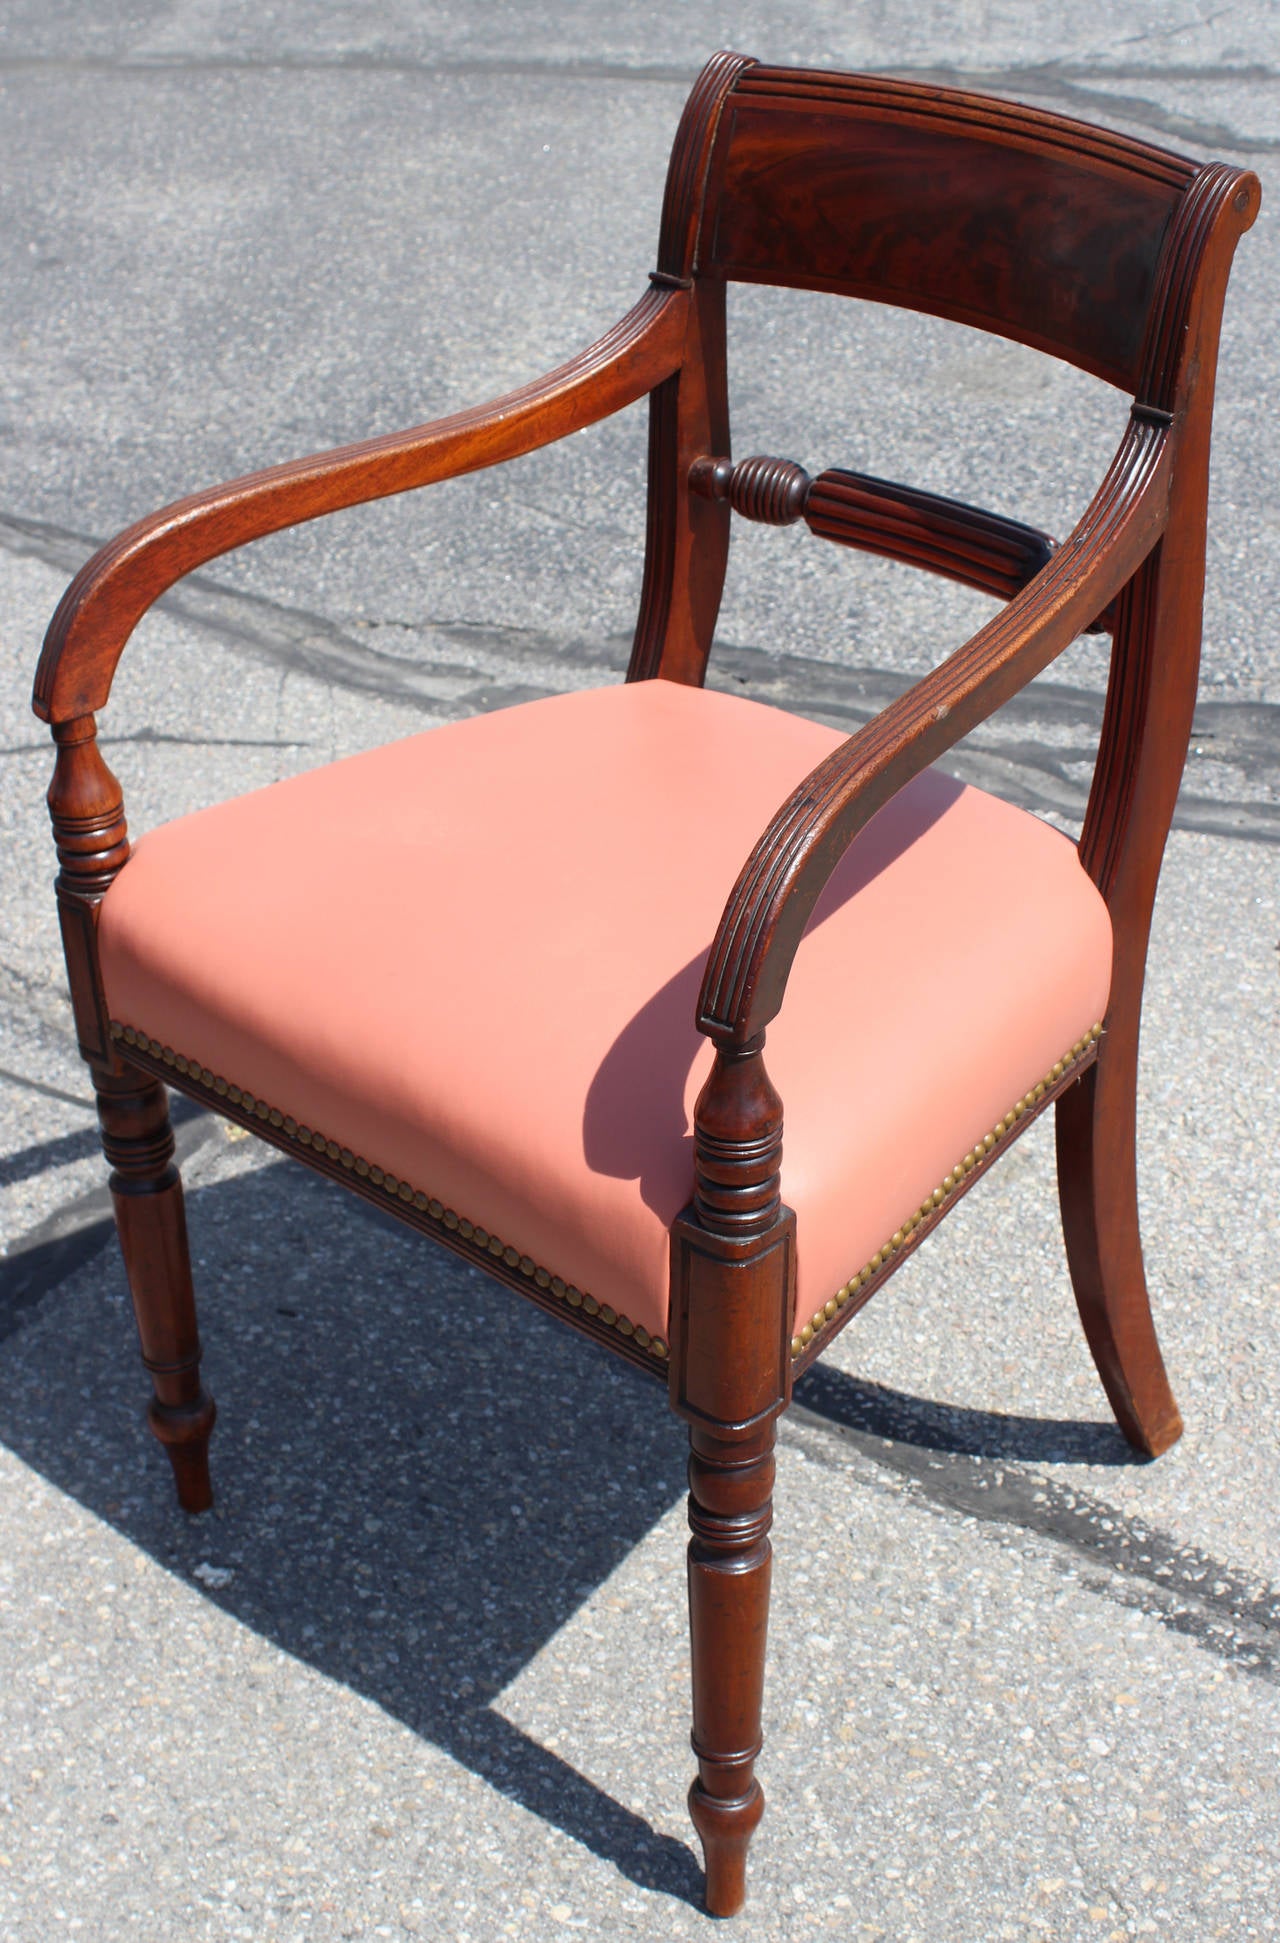 Set of 12 Regency period mahogany dining chairs, including two arm chairs and 10 side chairs. Each with a curved tablet top rail with a nicely figured mahogany panel and nicely shaped and reeded stiles centering a boldly turned and fluted center